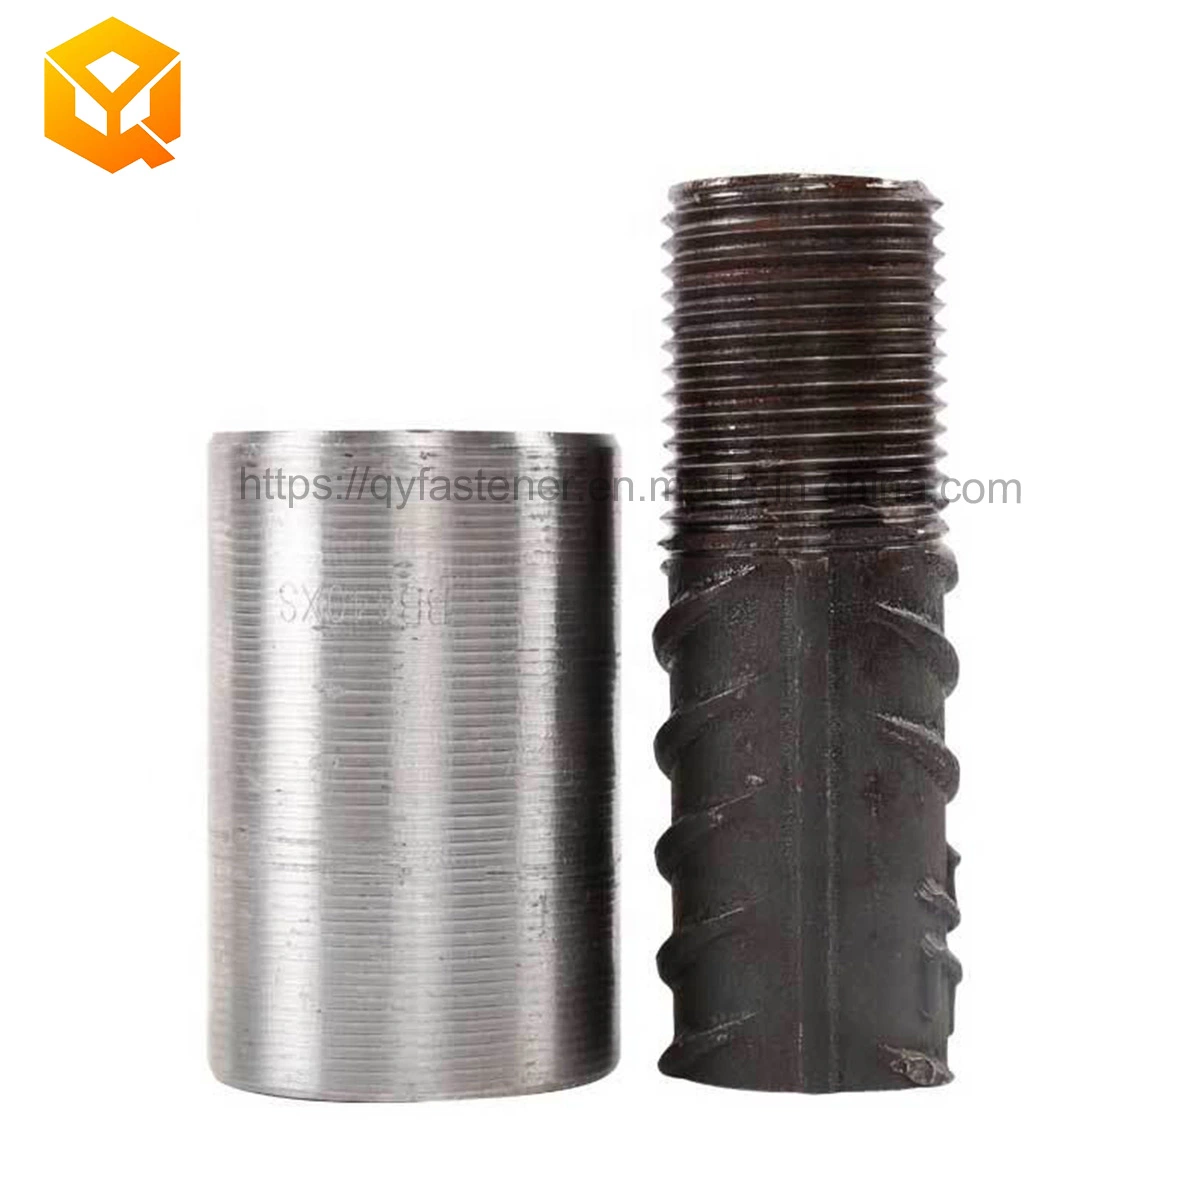 Building Grouted Coupler Reinforced Connecting Threaded Pipe Rebar Embedded Sleeve